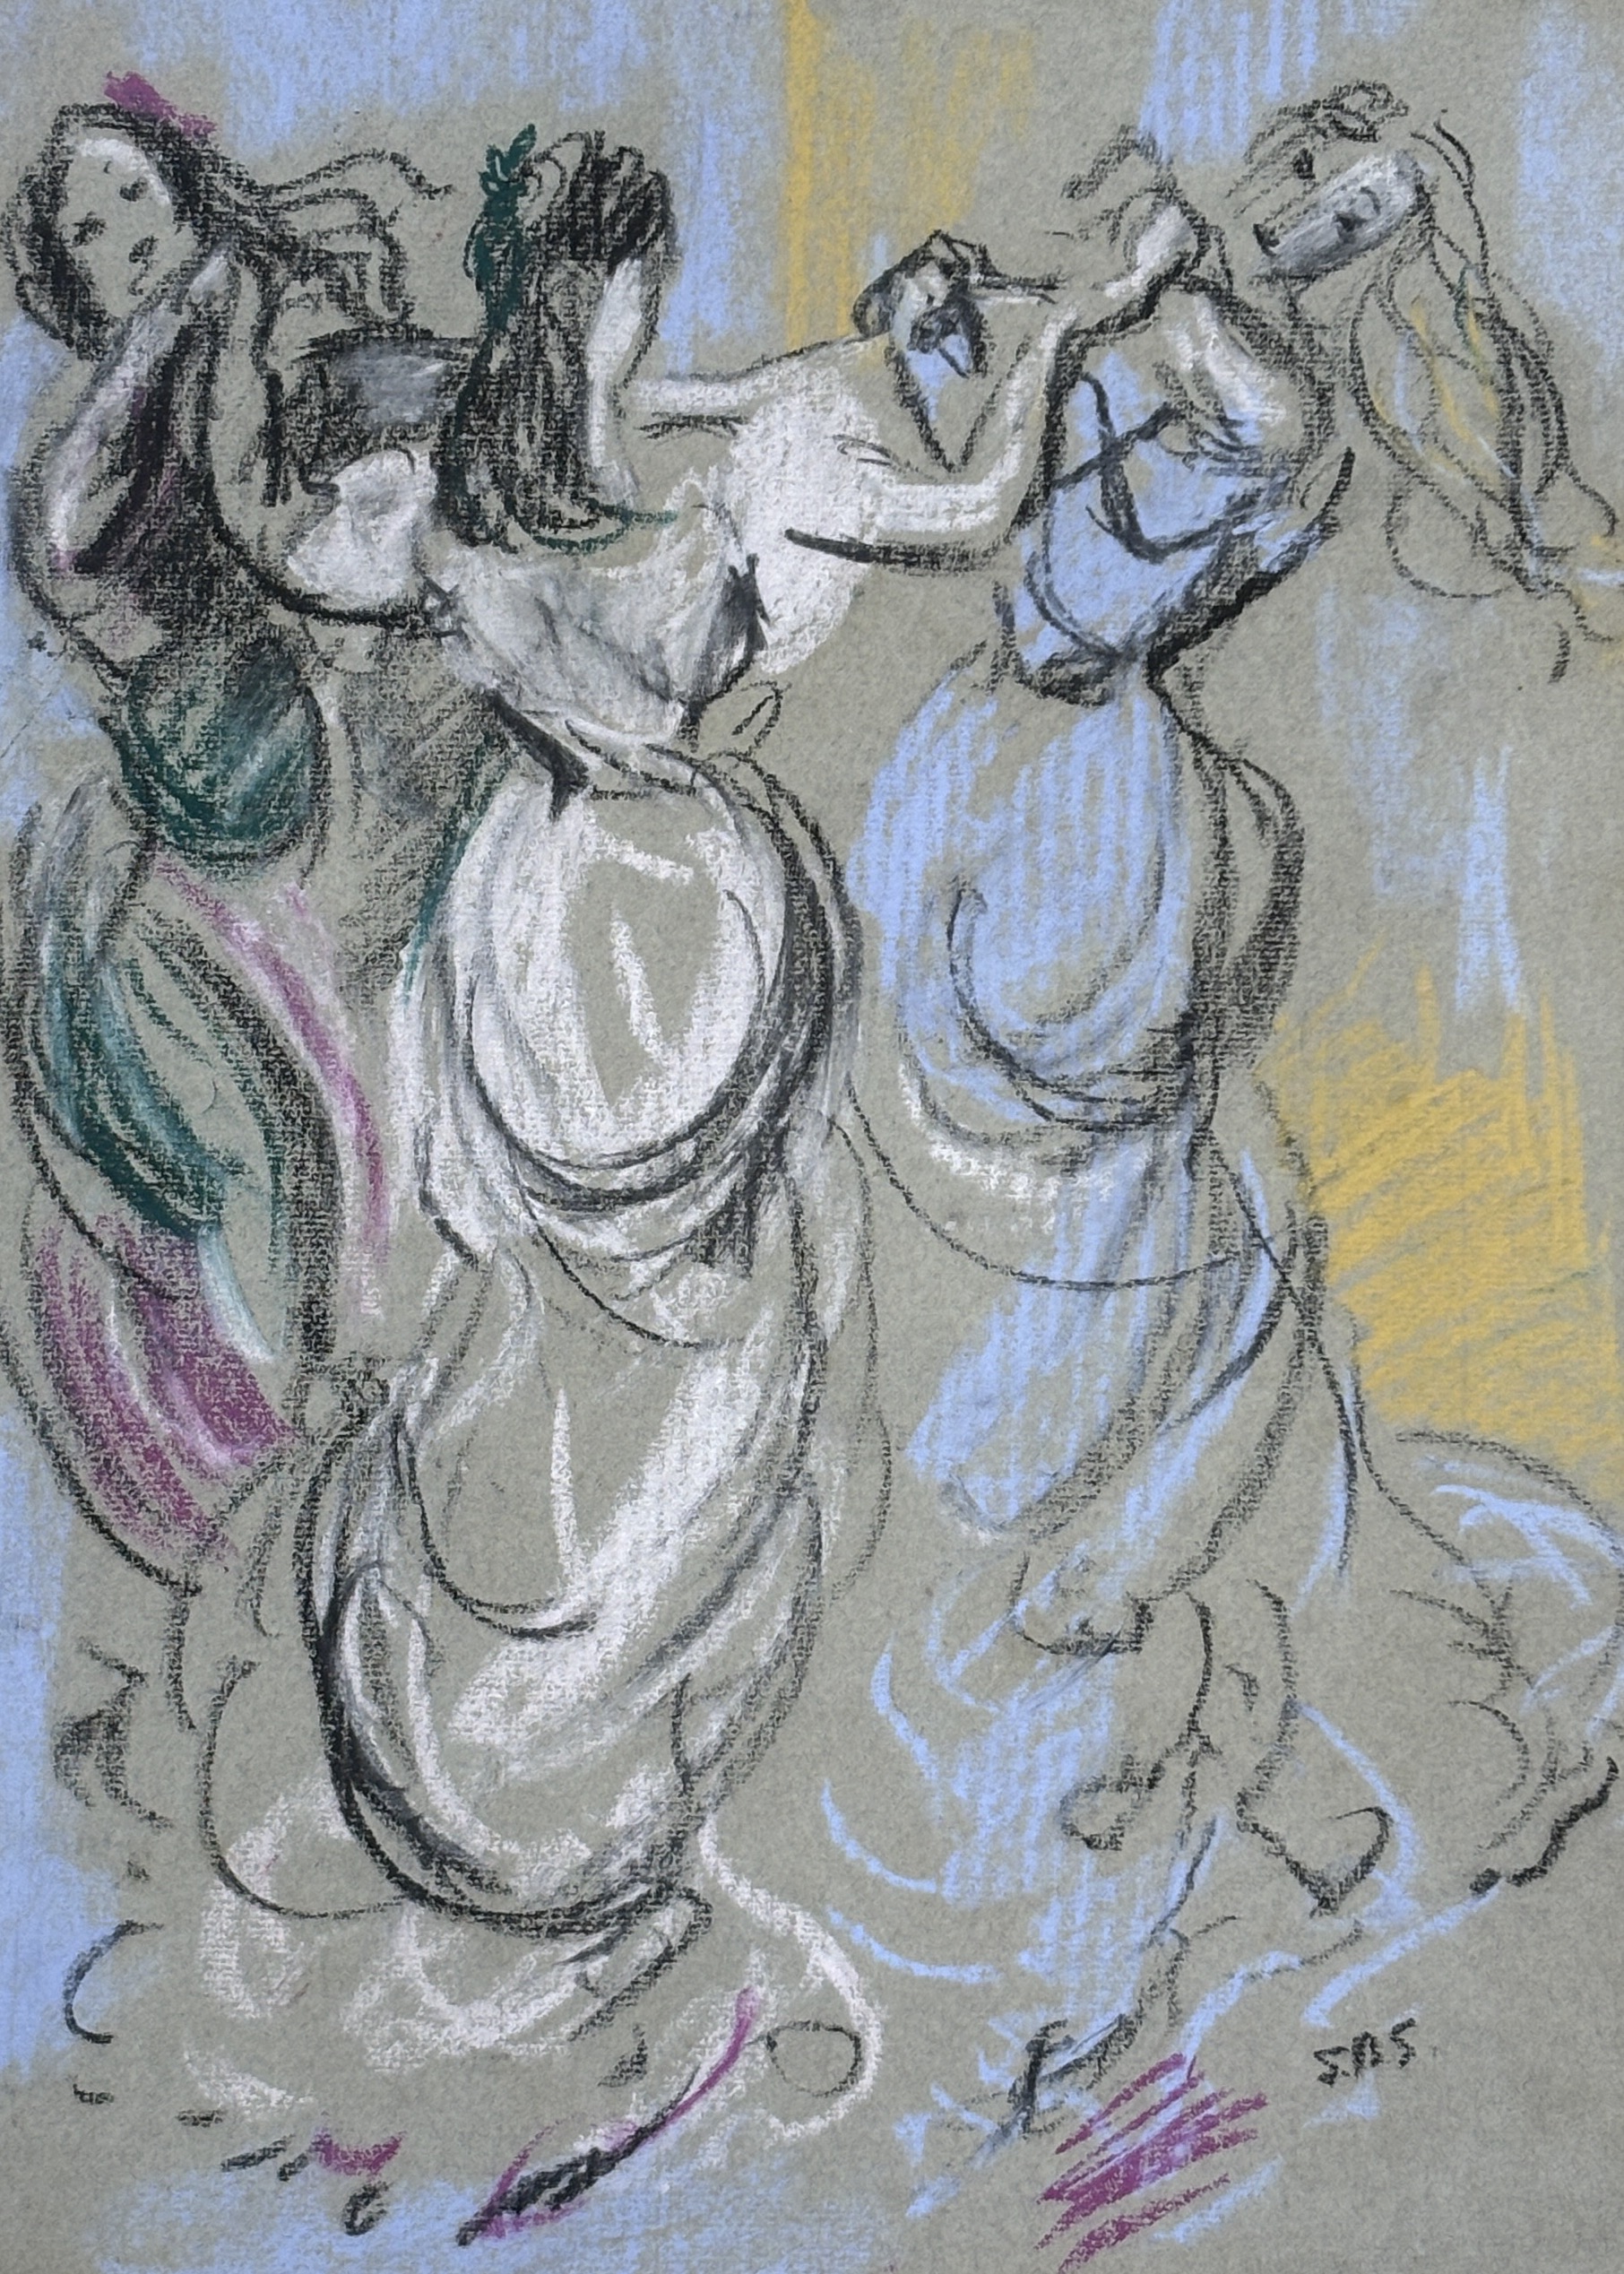 Elinor Bellingham-Smith (1906-1988), chalk on paper, 'Three dancers', signed with initials, inscribed verso, 40 x 30cm, Provenance: The artist's family coloured chalks, studio stamp